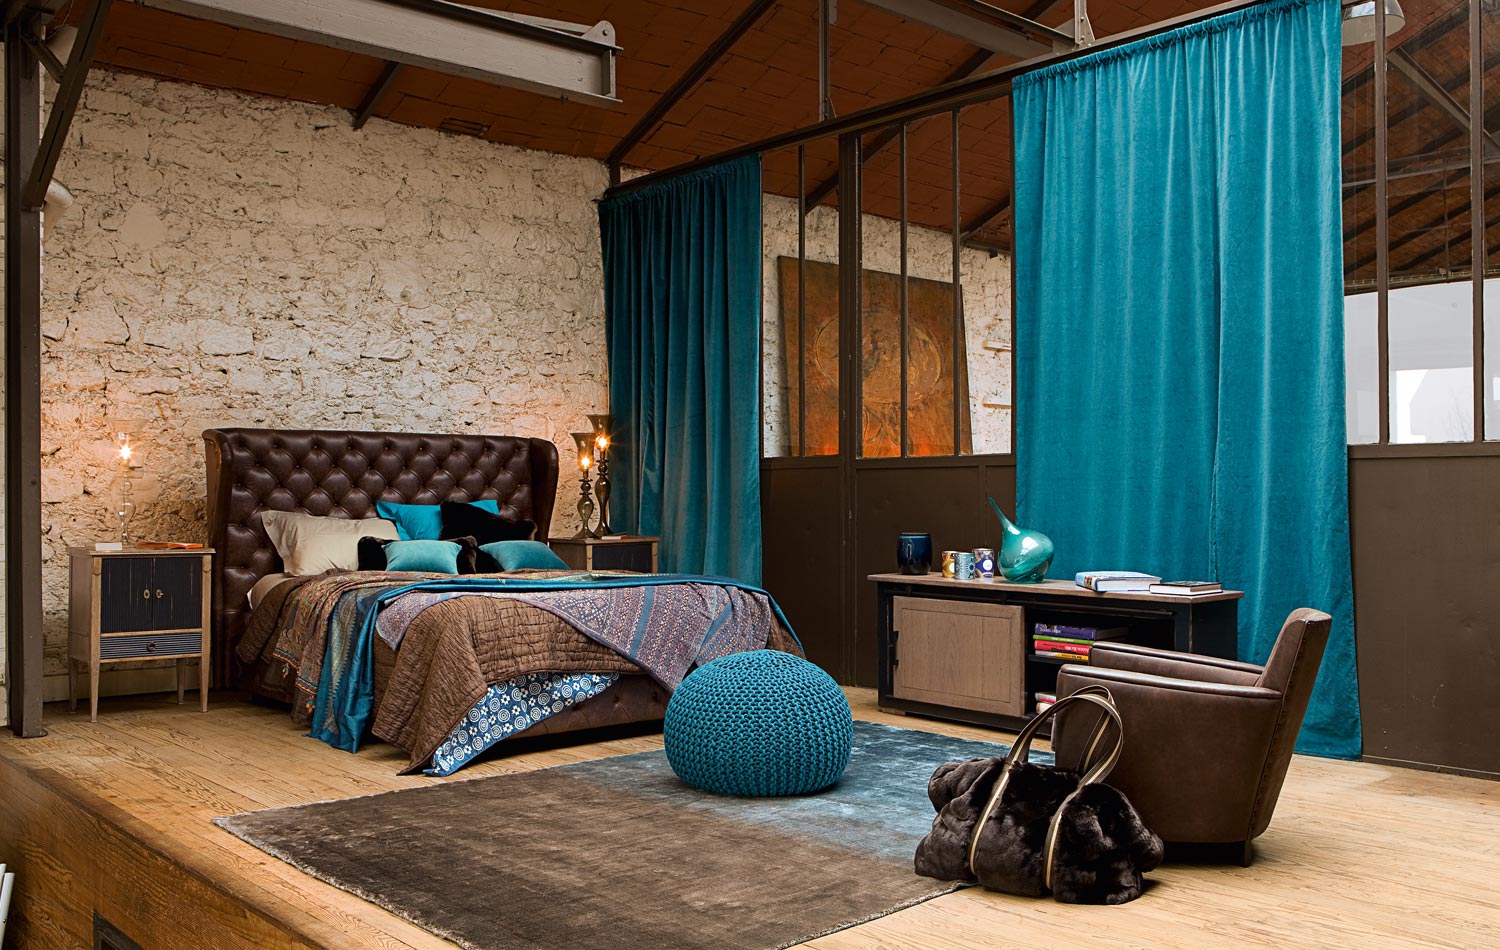 bobois roche bedroom inspiration bedrooms modern beds brown chambre coucher dormitorios decorating teal browns dark sofas selection miss don interior